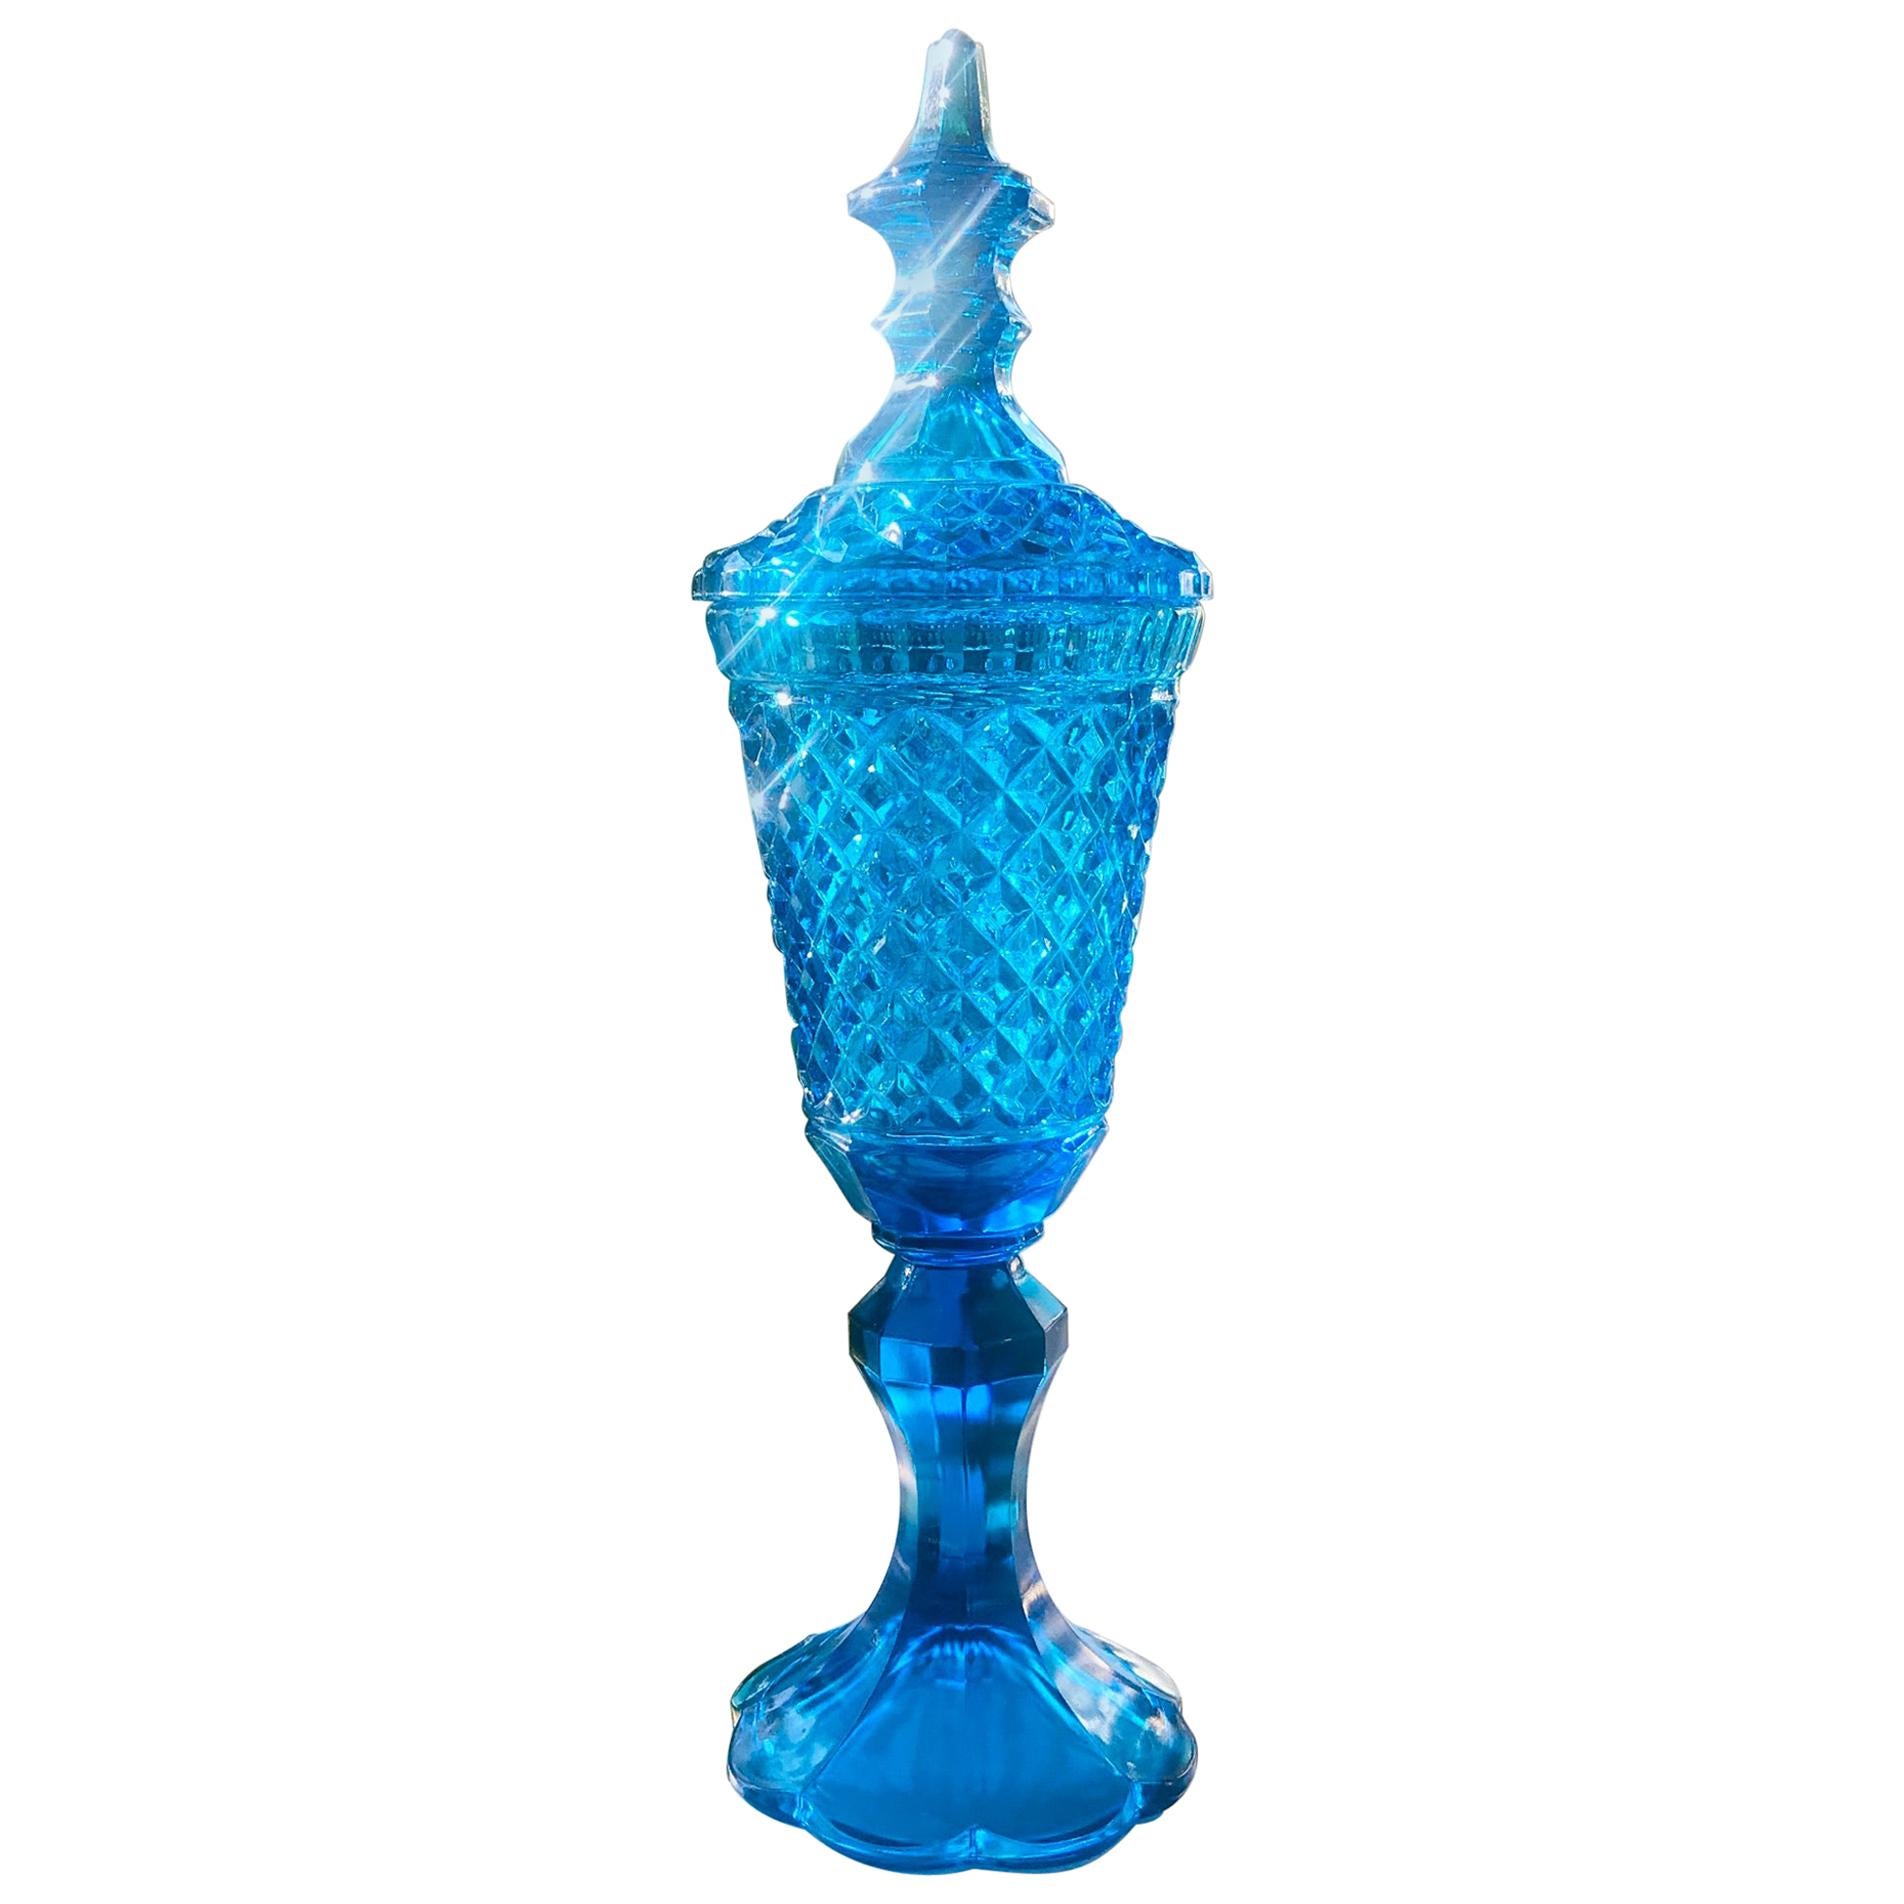 Hollywood Regency Footed Glass Urn with Lid in Vibrant Aqua, 1940s